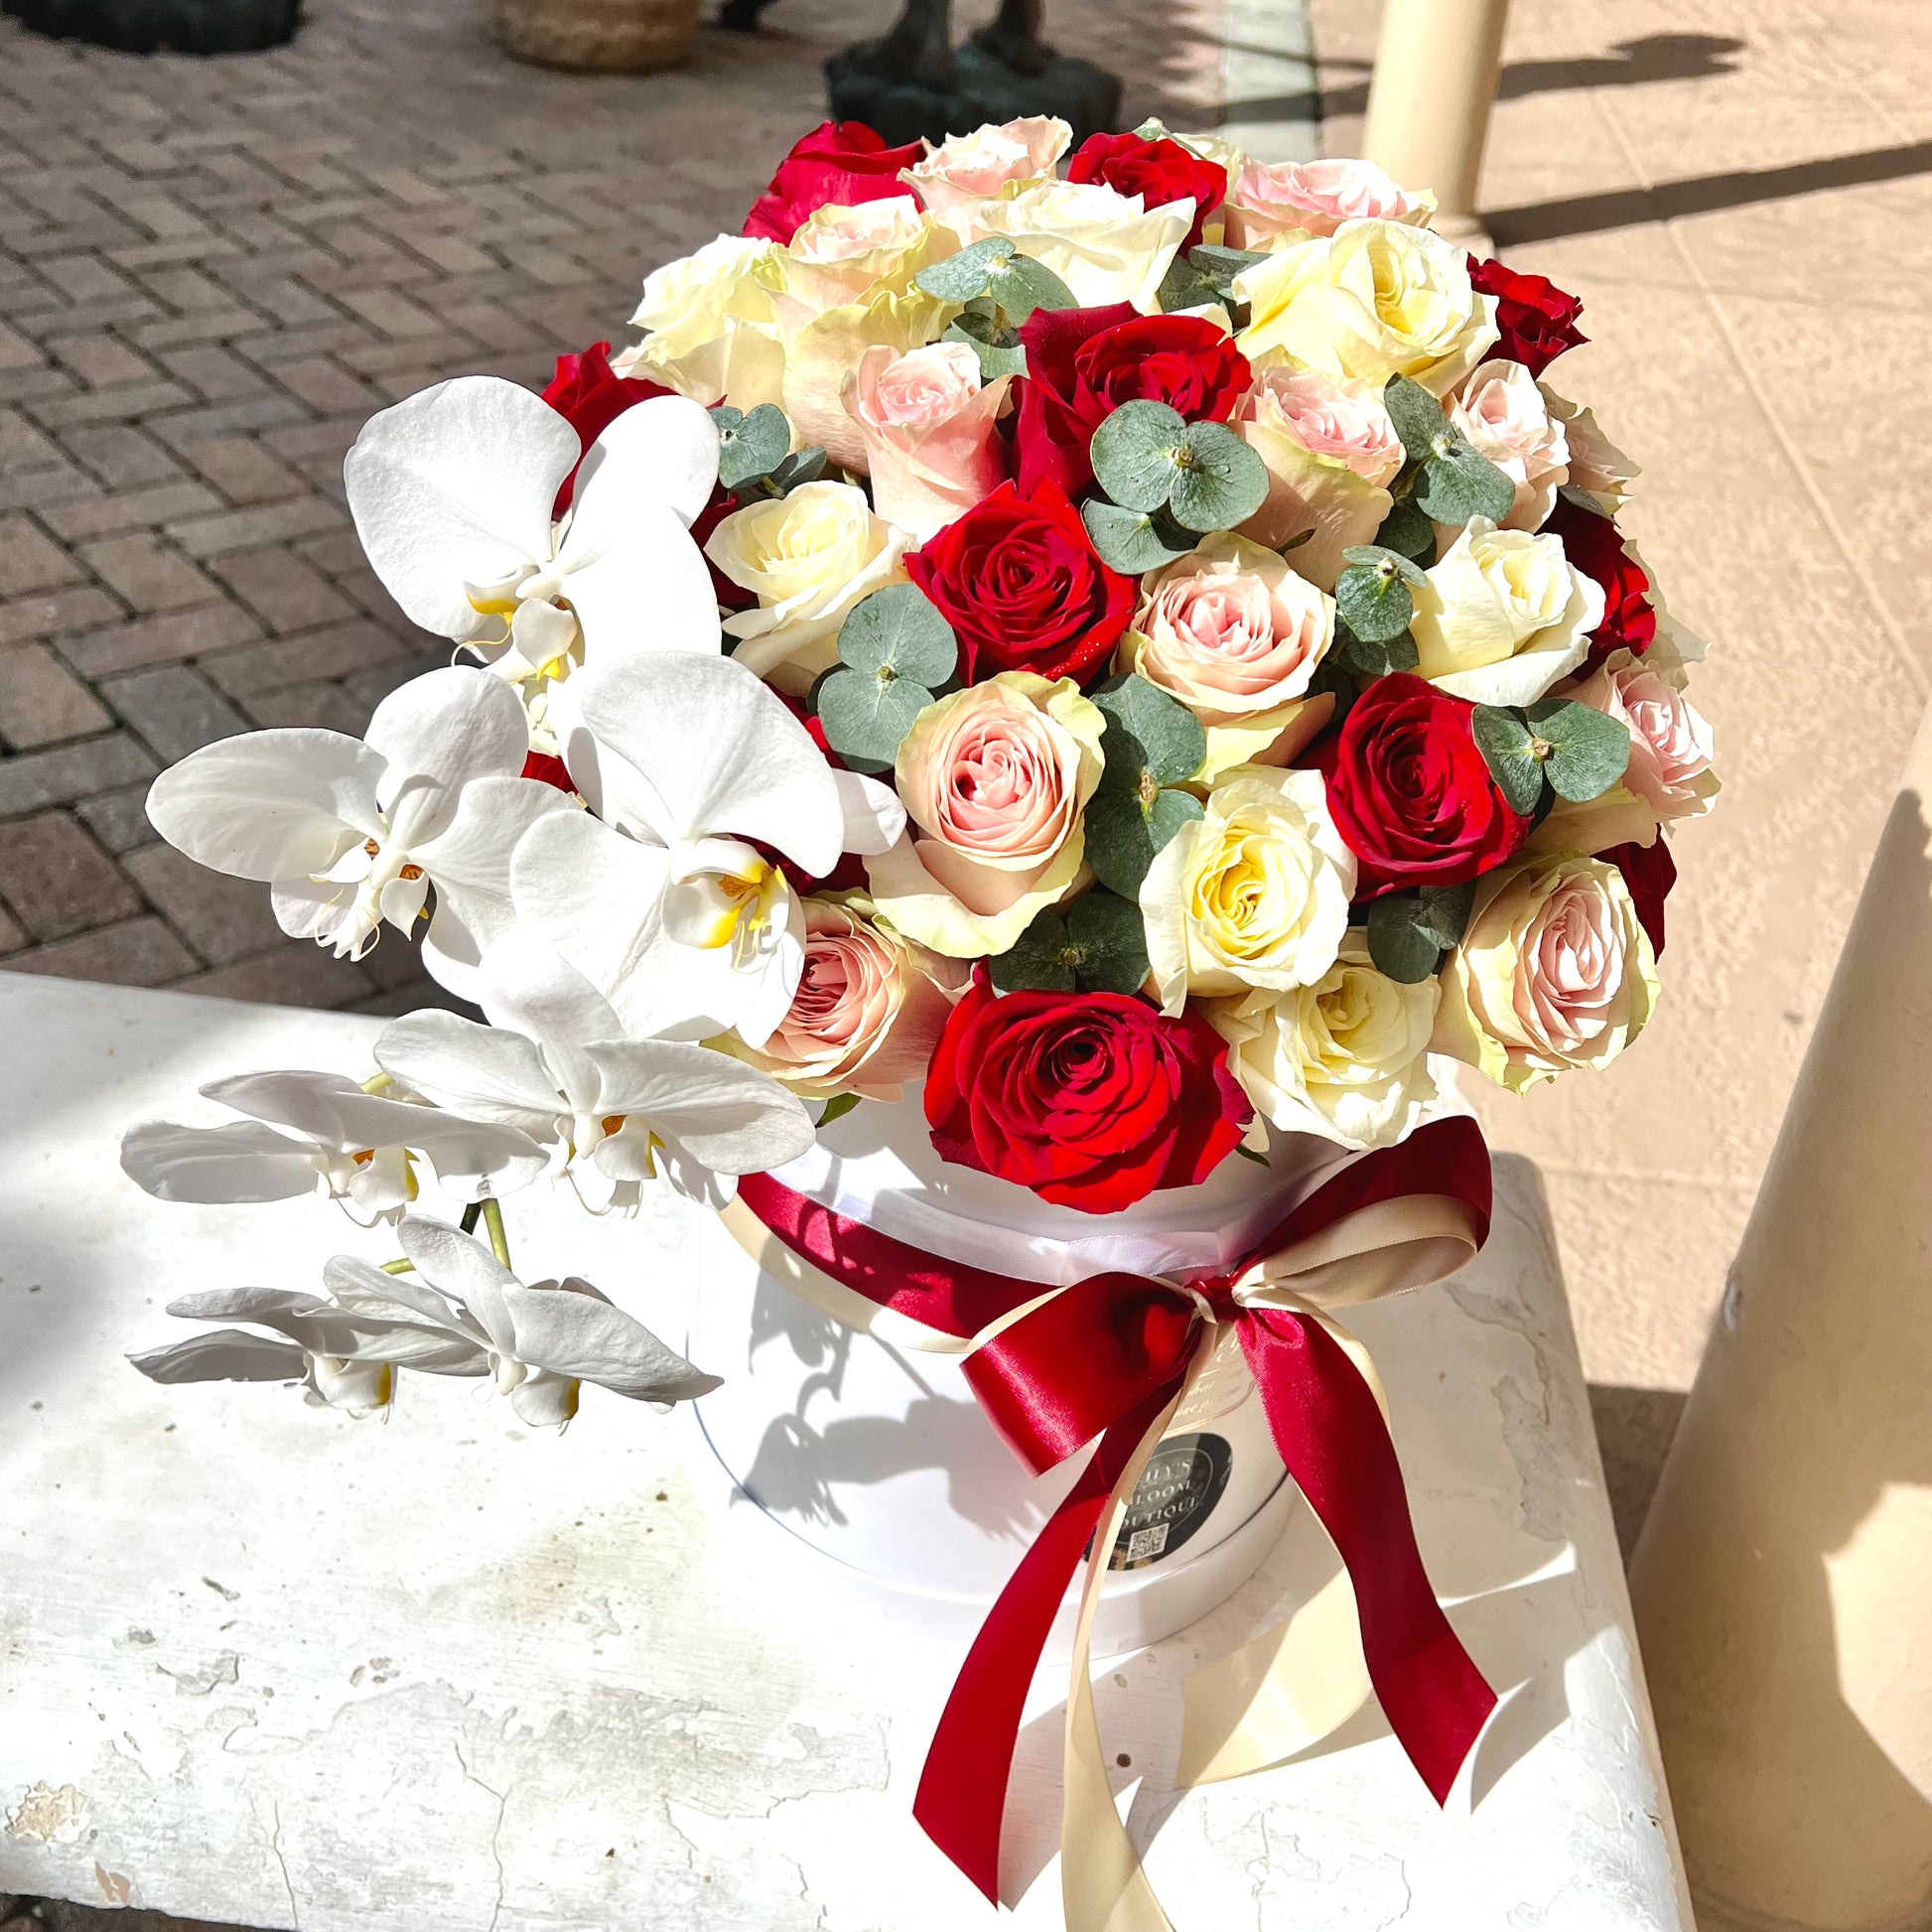 Red, yellow roses in white round box with sun on them with red ribbon